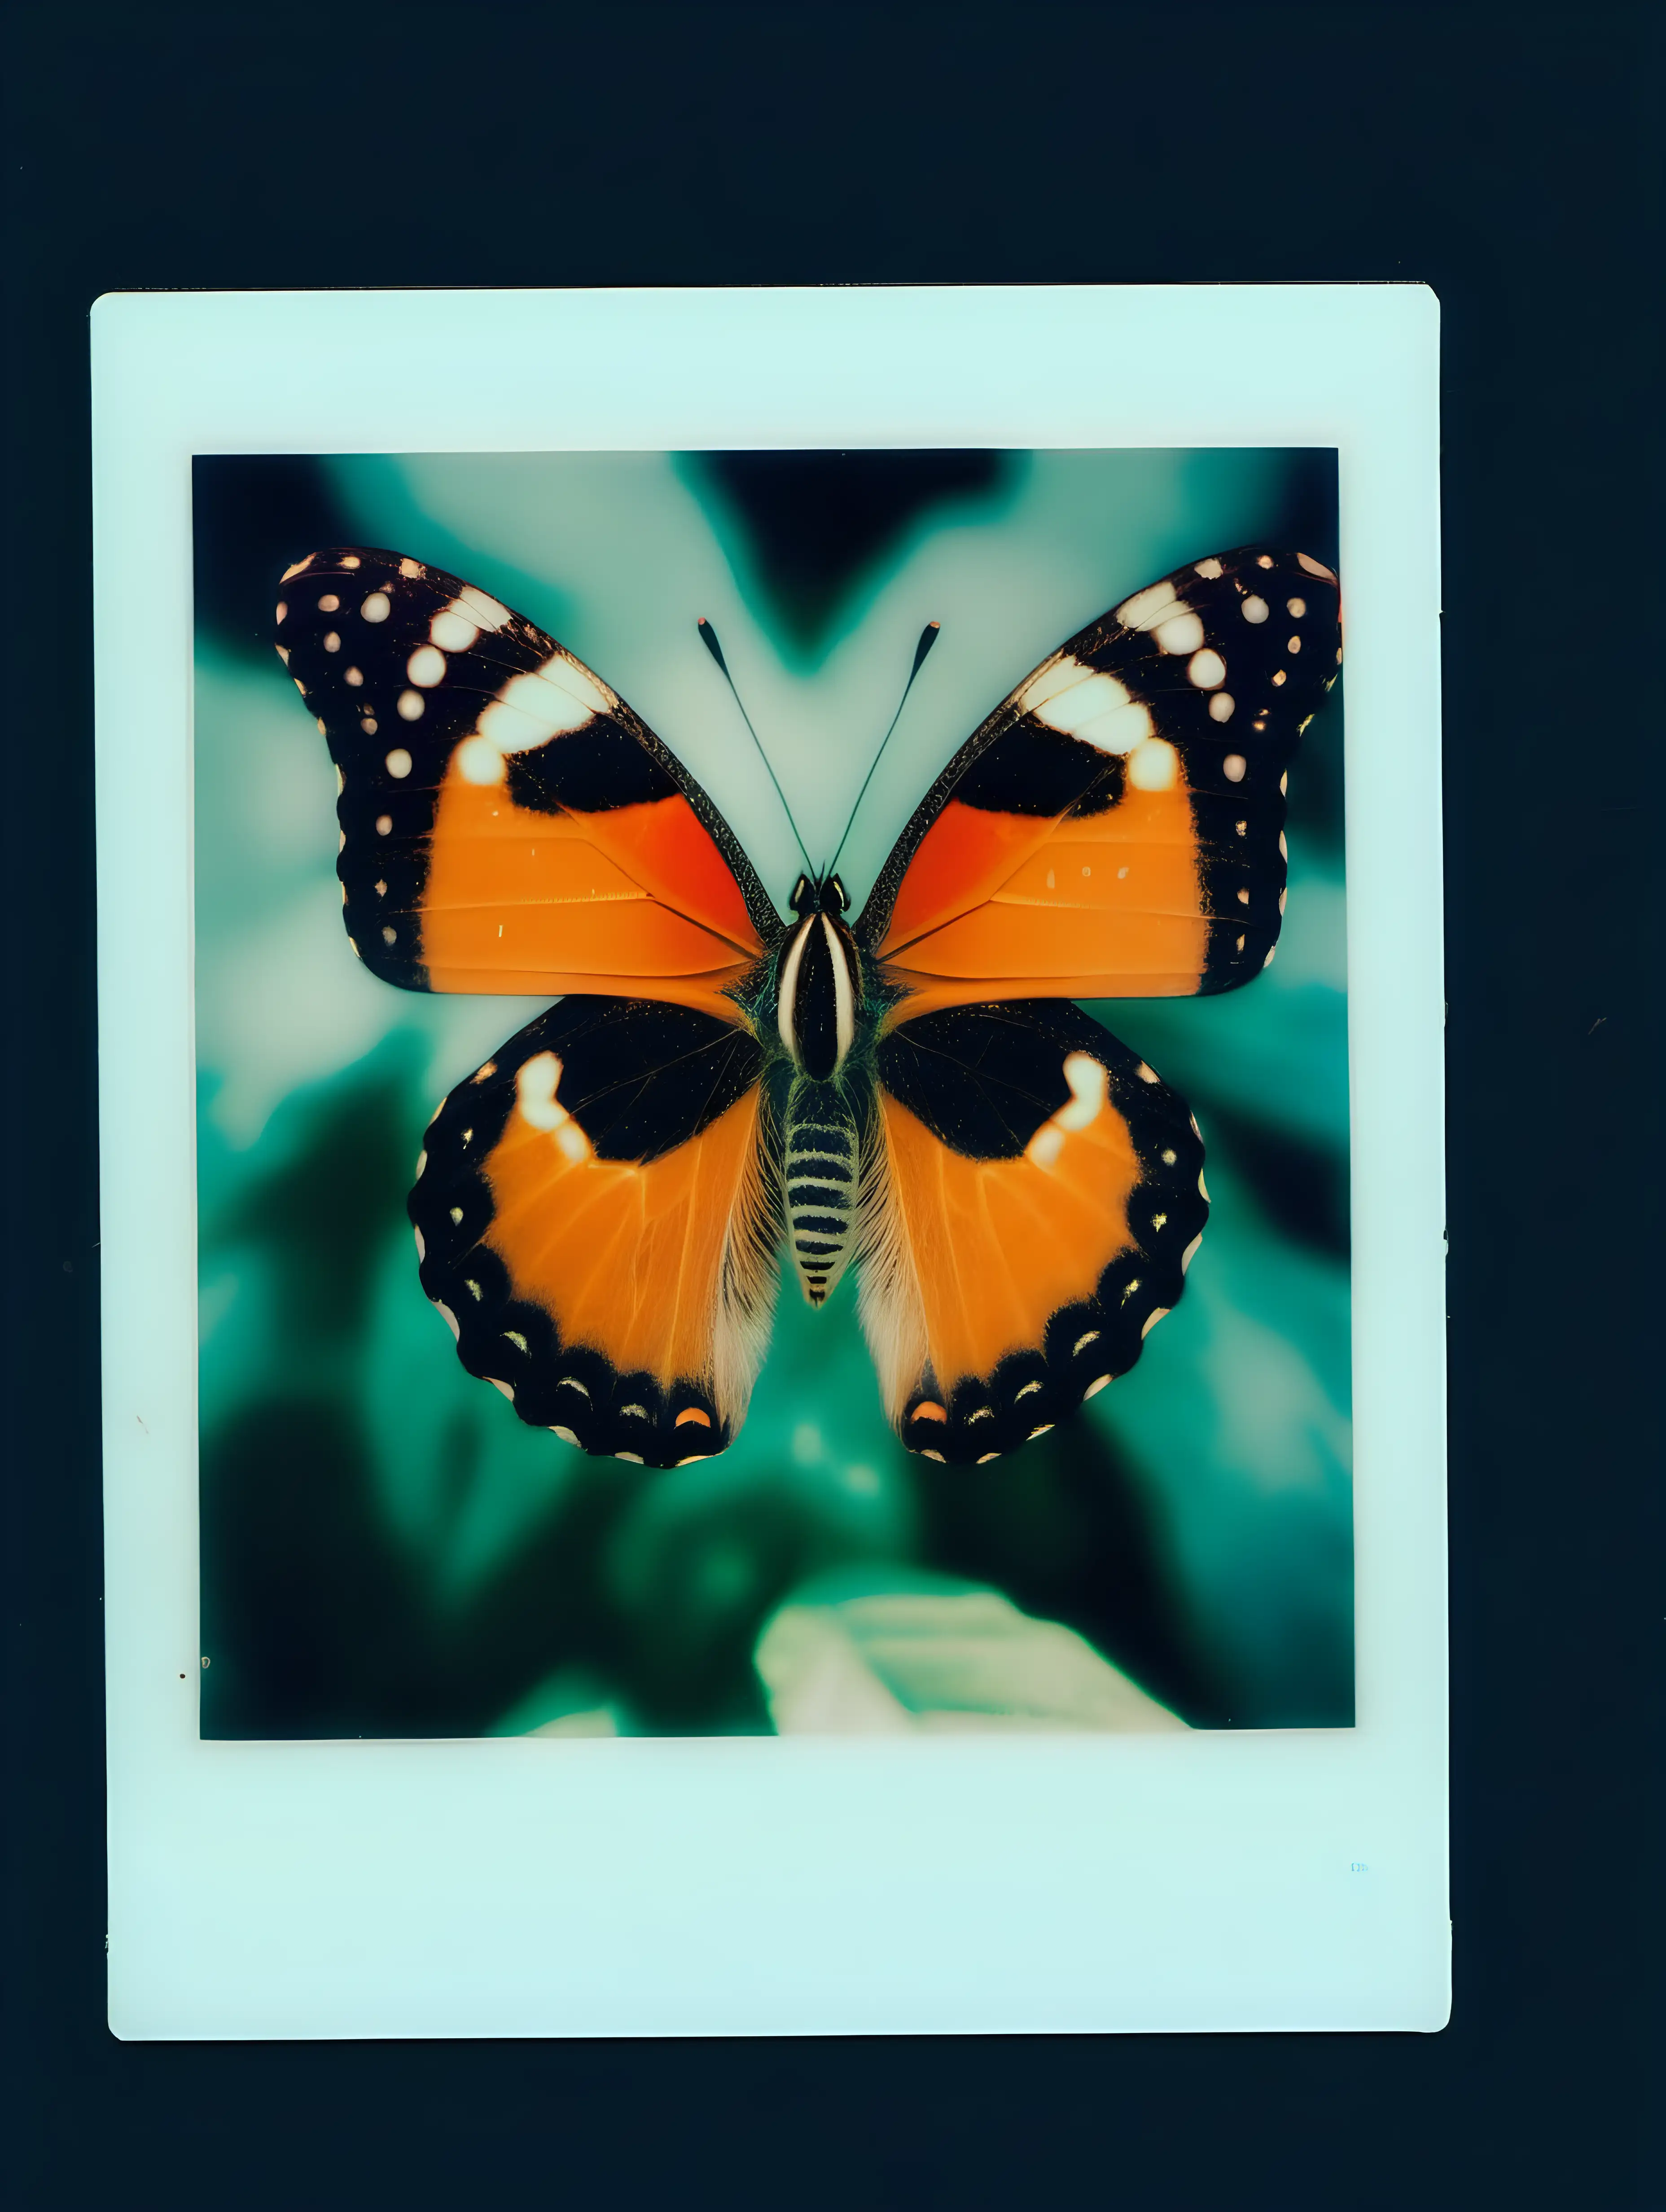 polaroid of a butterfly